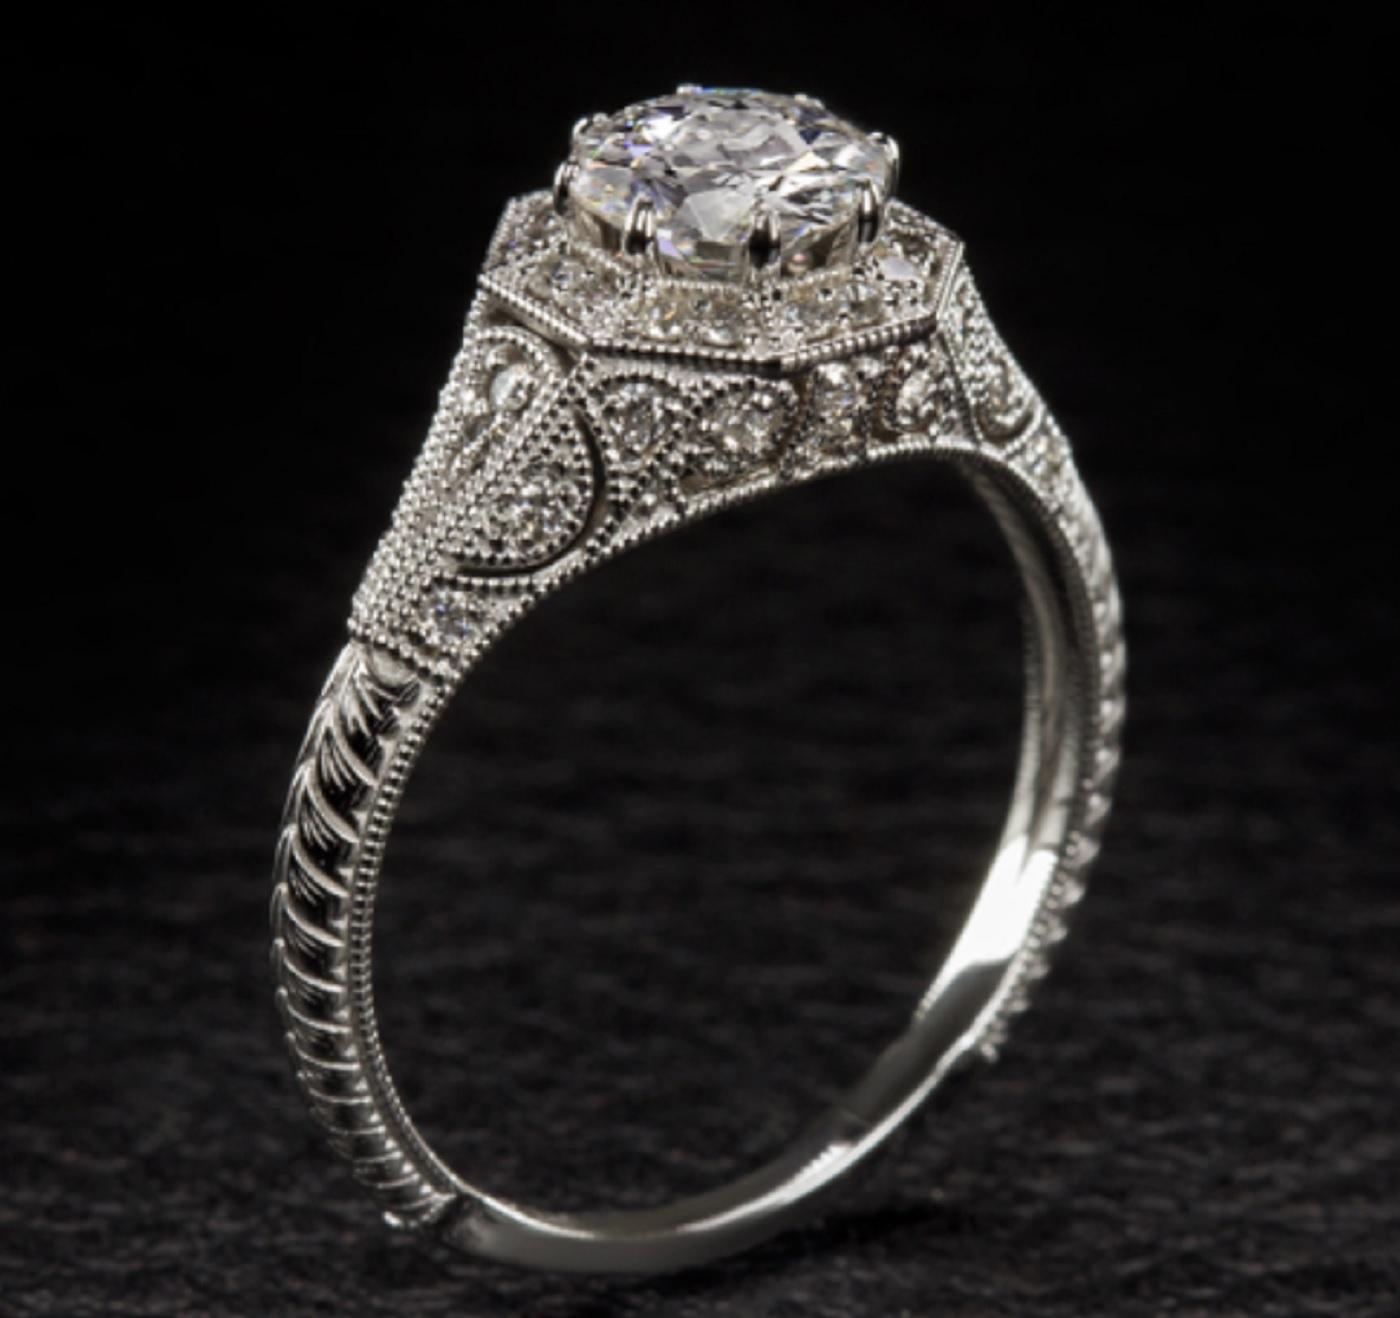 This richly detailed and timelessly designed vintage style ring showcases a stunning old European cut diamond richly accented by a romantic vintage style setting. Graded F for color, the 0.70 carat center diamond is colorless, a rarity in diamonds